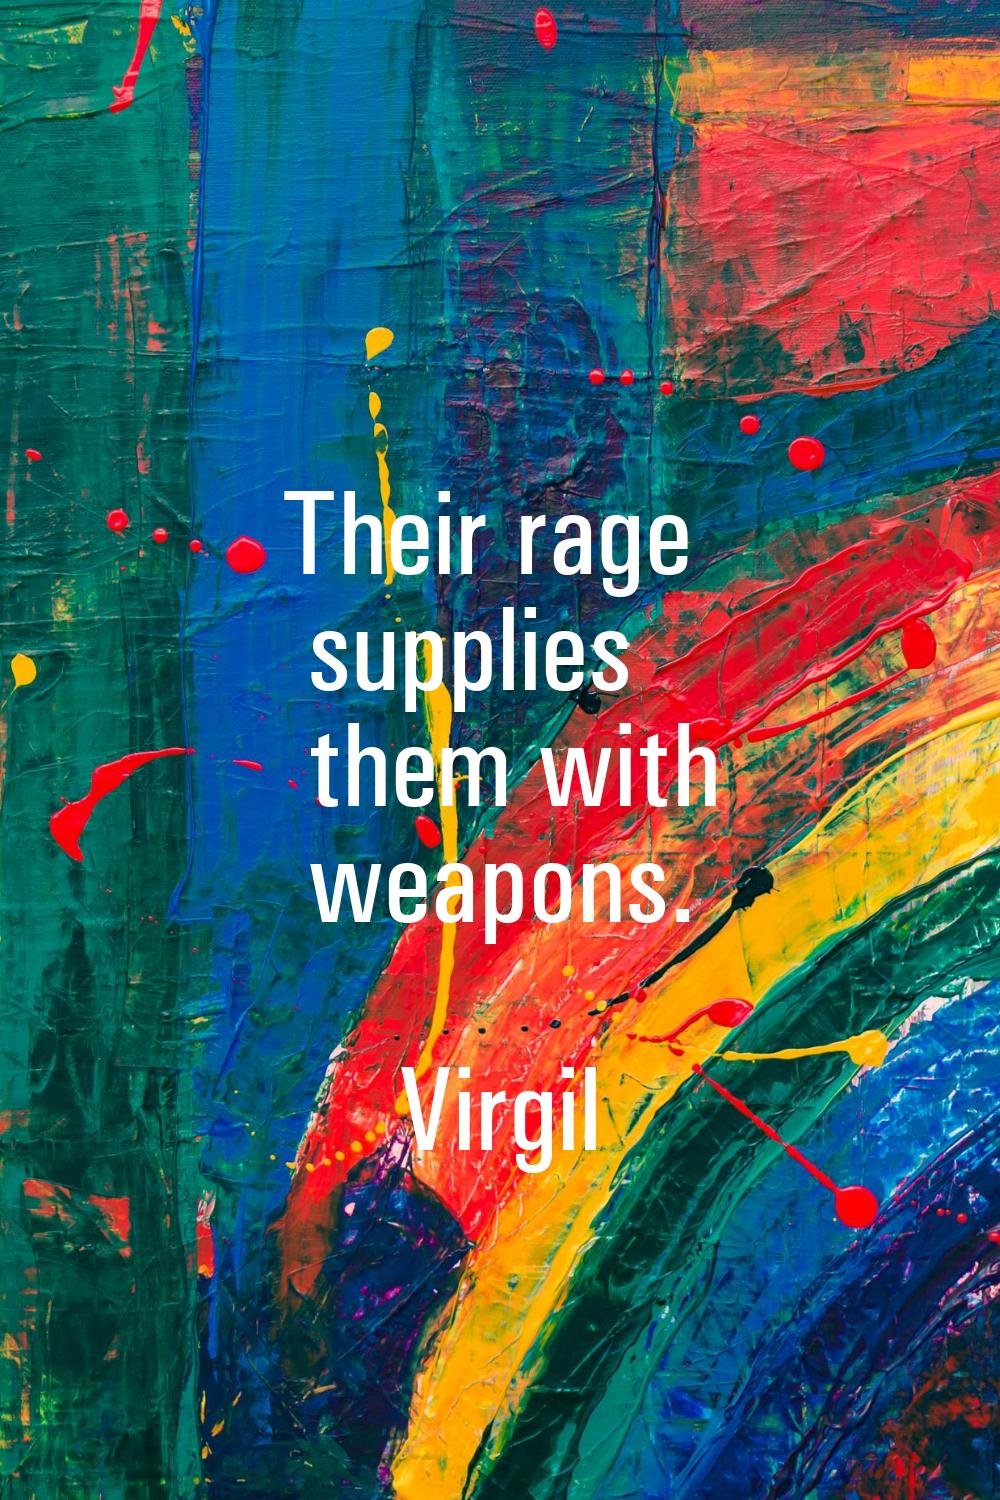 Their rage supplies them with weapons.